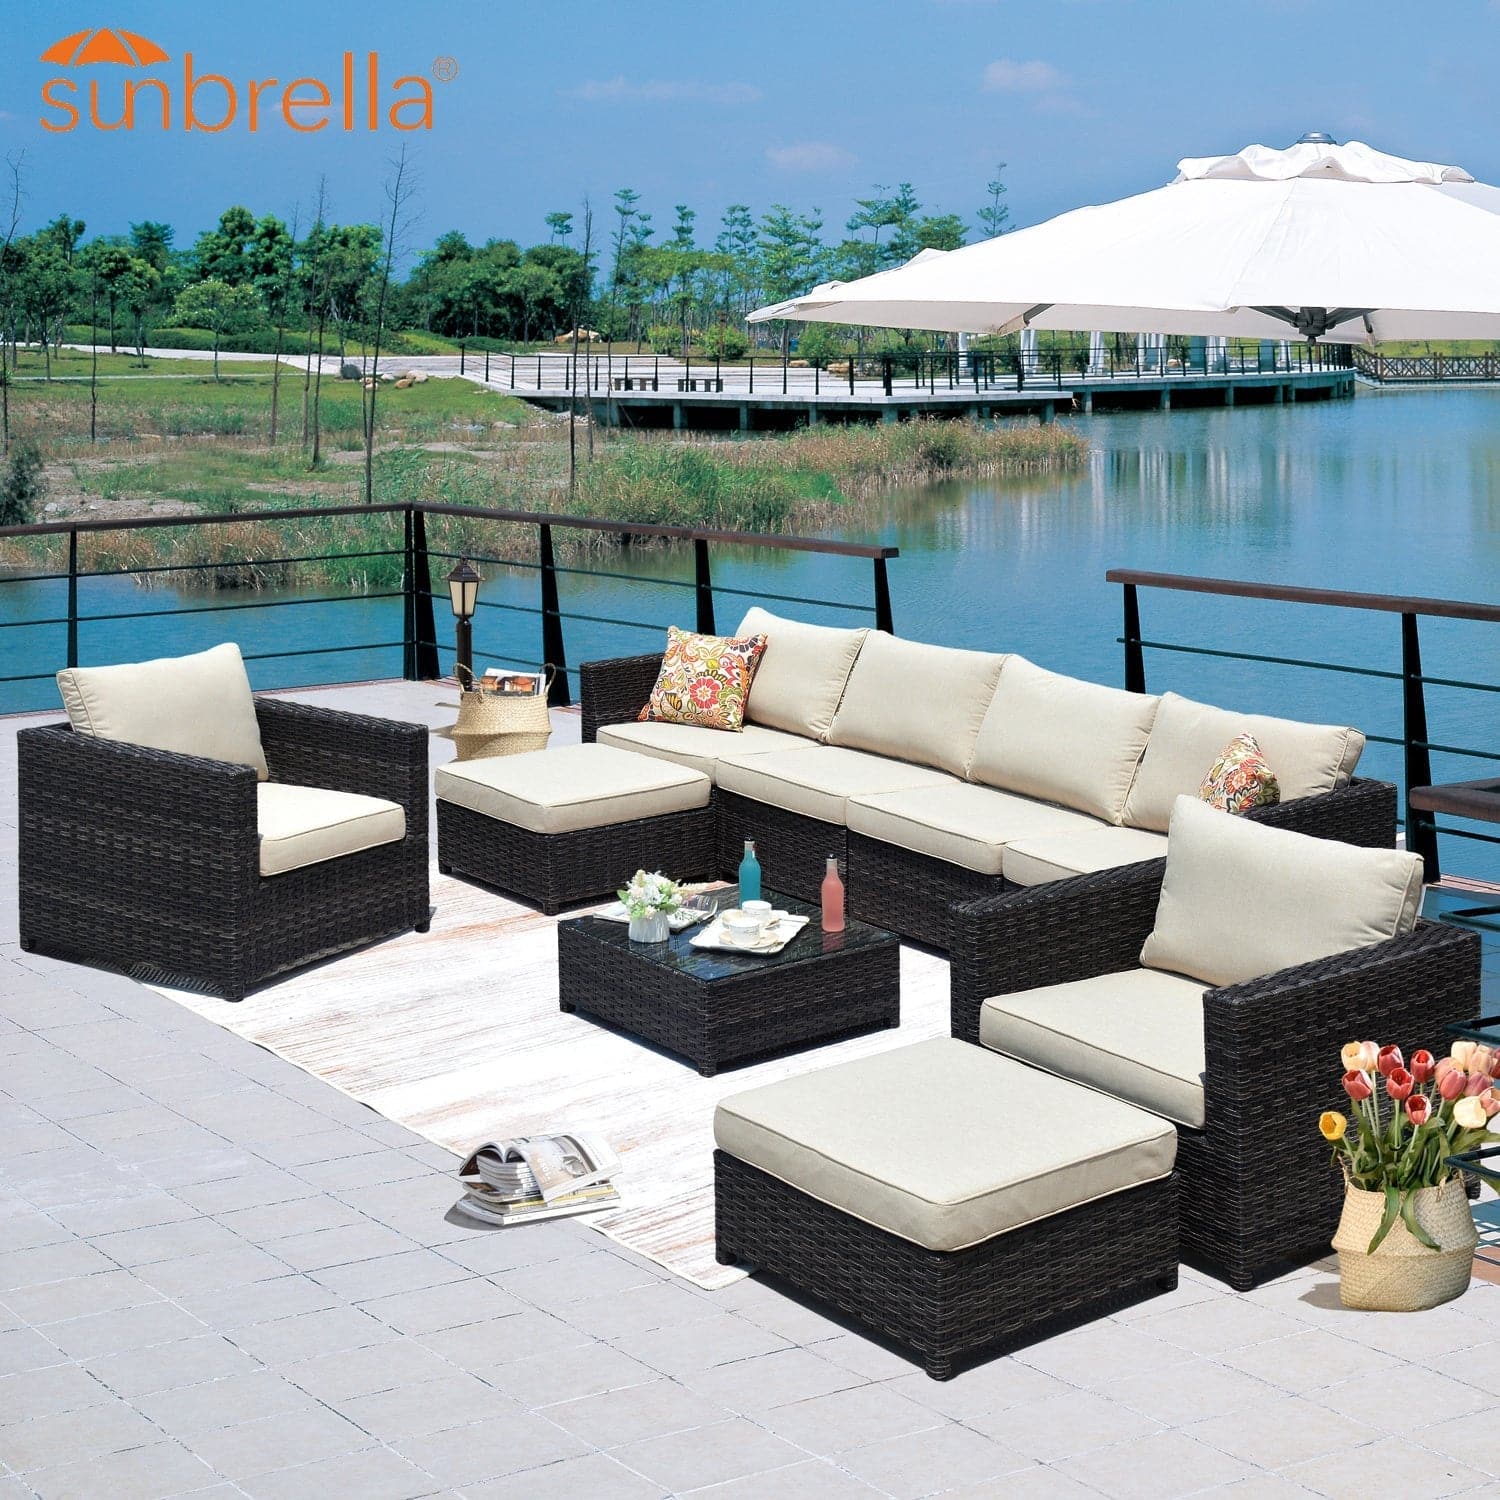 6 Reasons to Choose Sunbrella Fabric for Outdoor Furniture